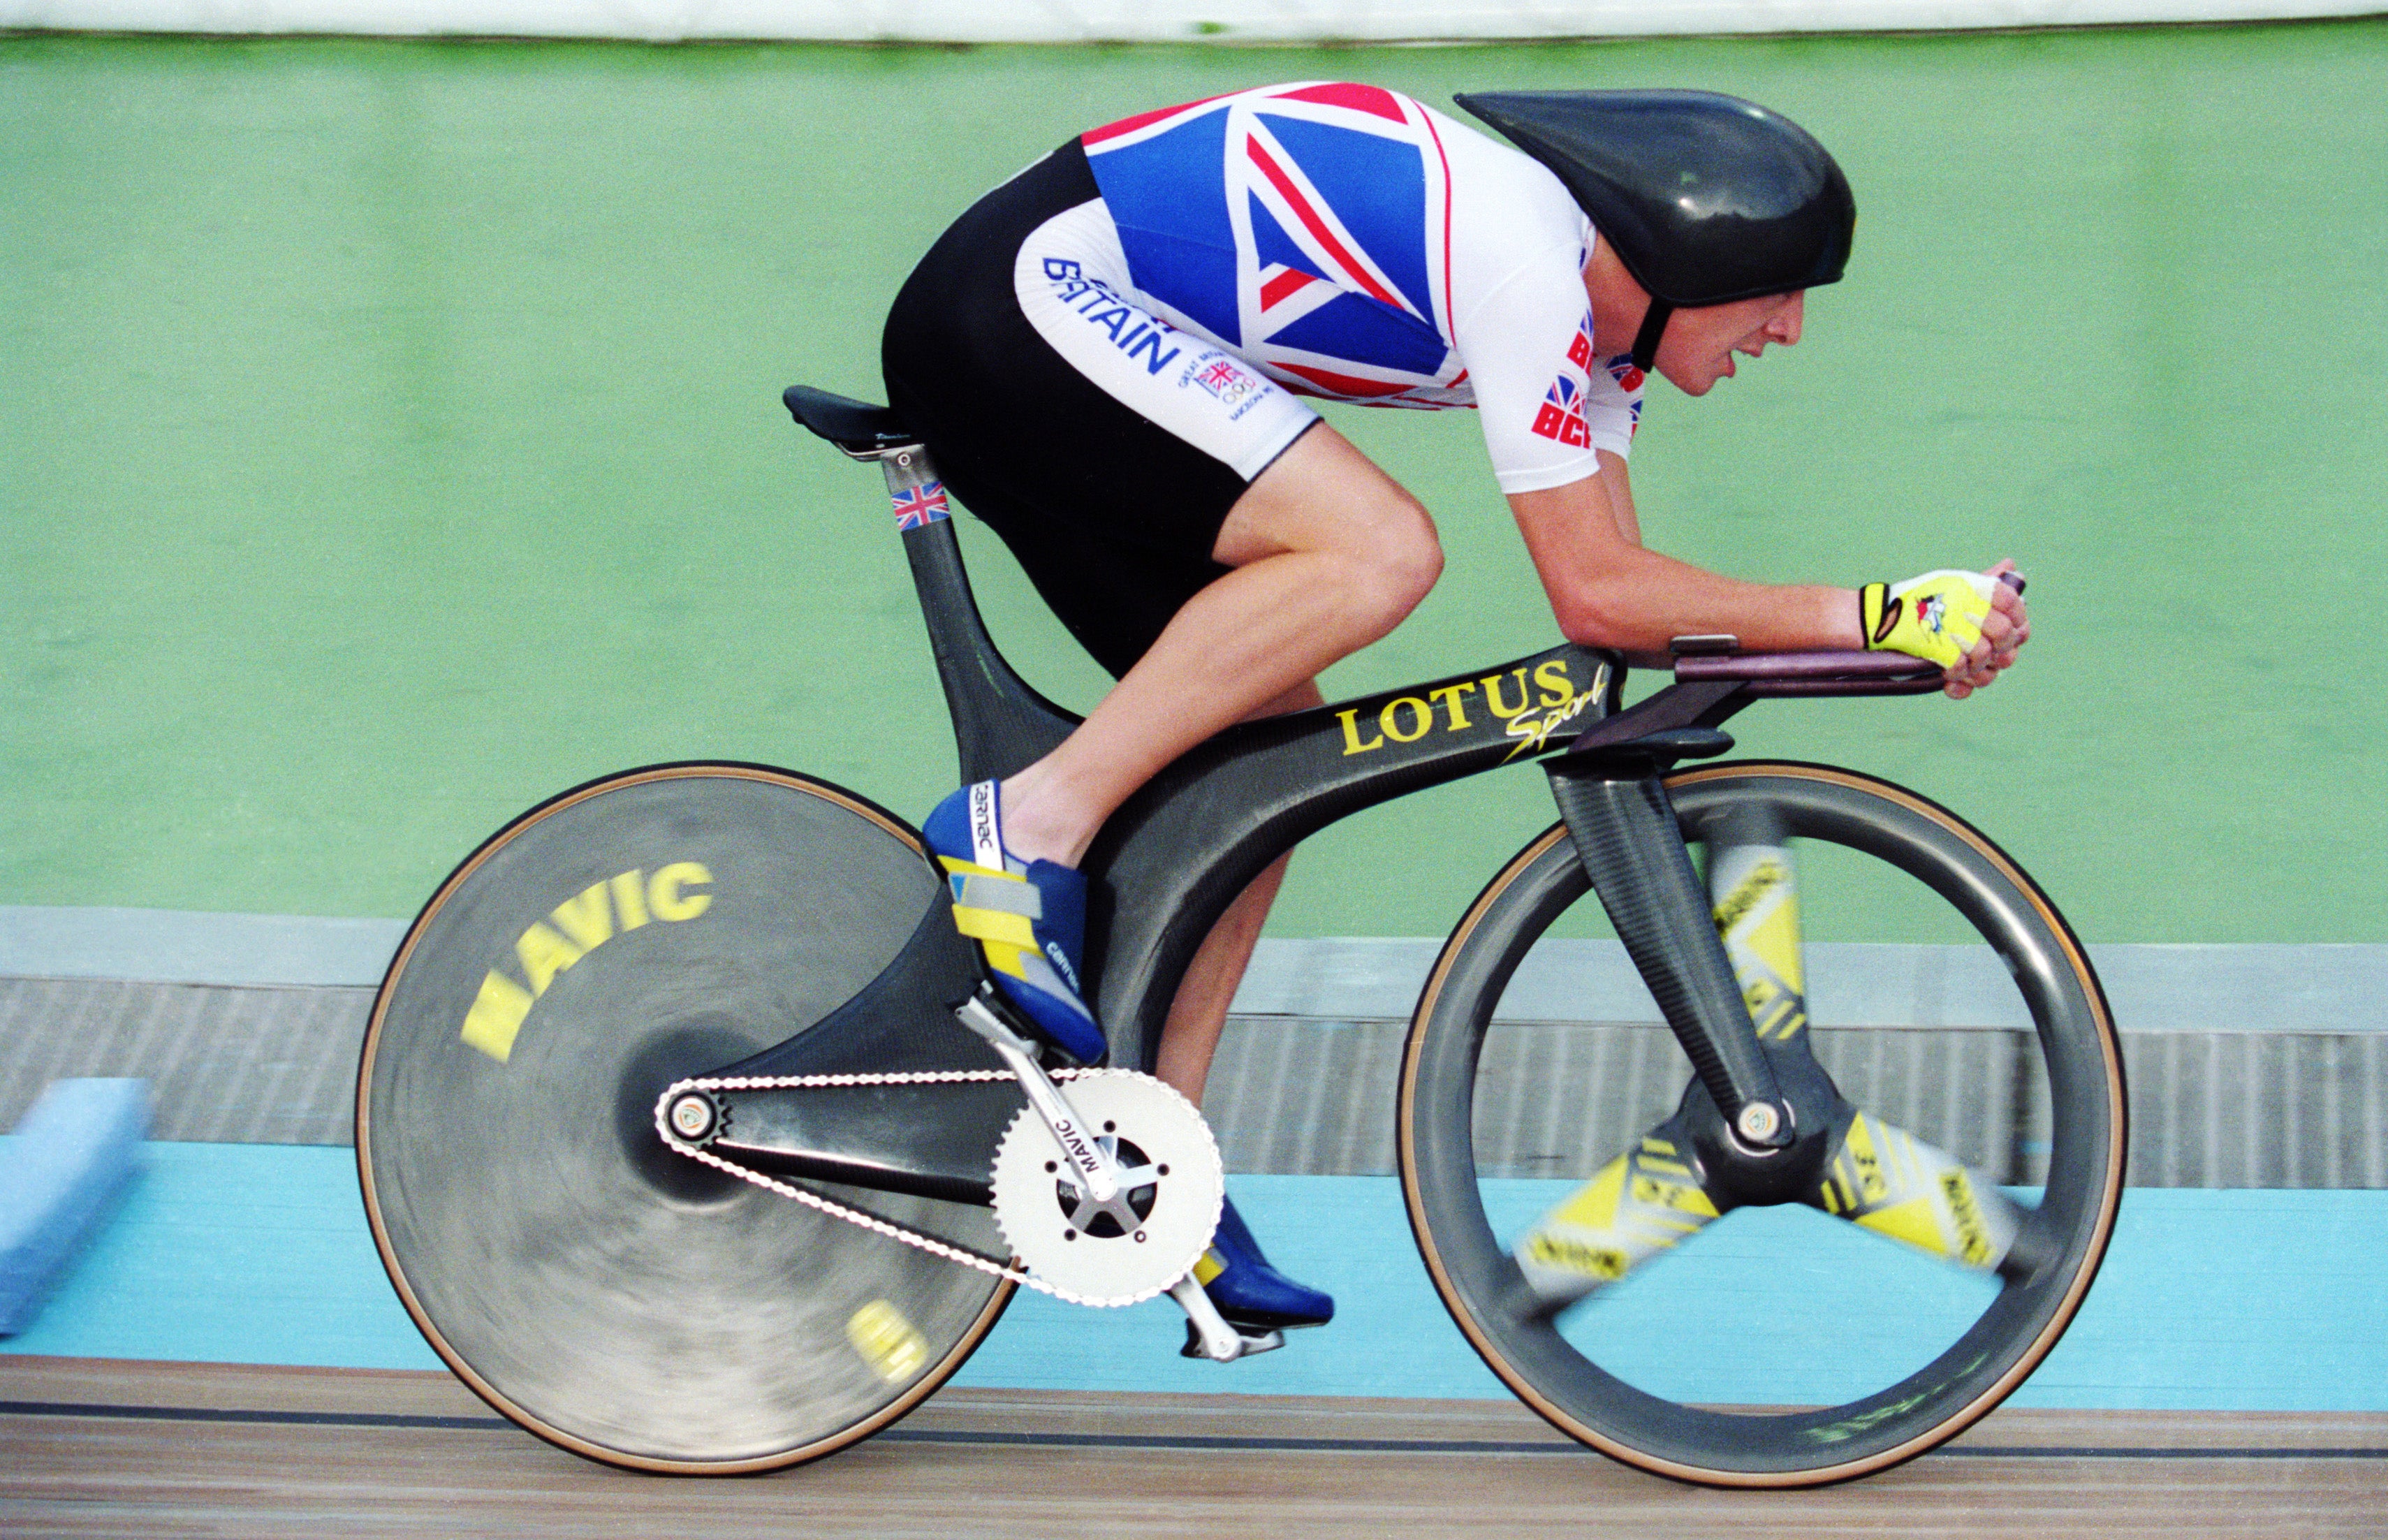 A 3D-Printed Bike Broke Lotus and Chris Boardman’s Hour Record After 26 Years